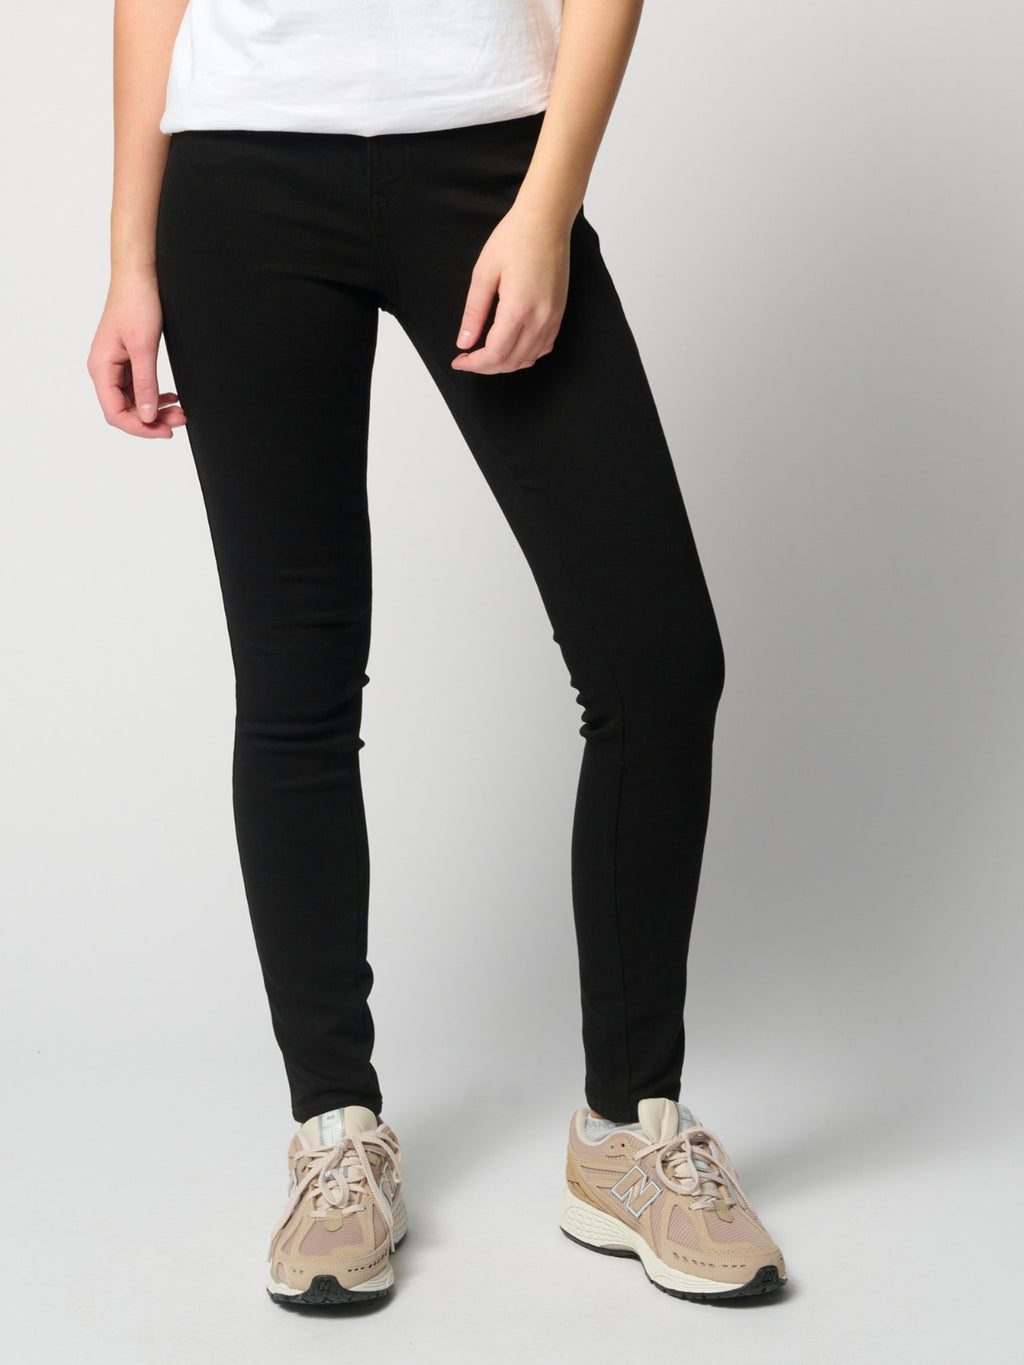 The Original Performance Skinny Jeans ™ ️ Donne - pacchetto (2 pezzi.)